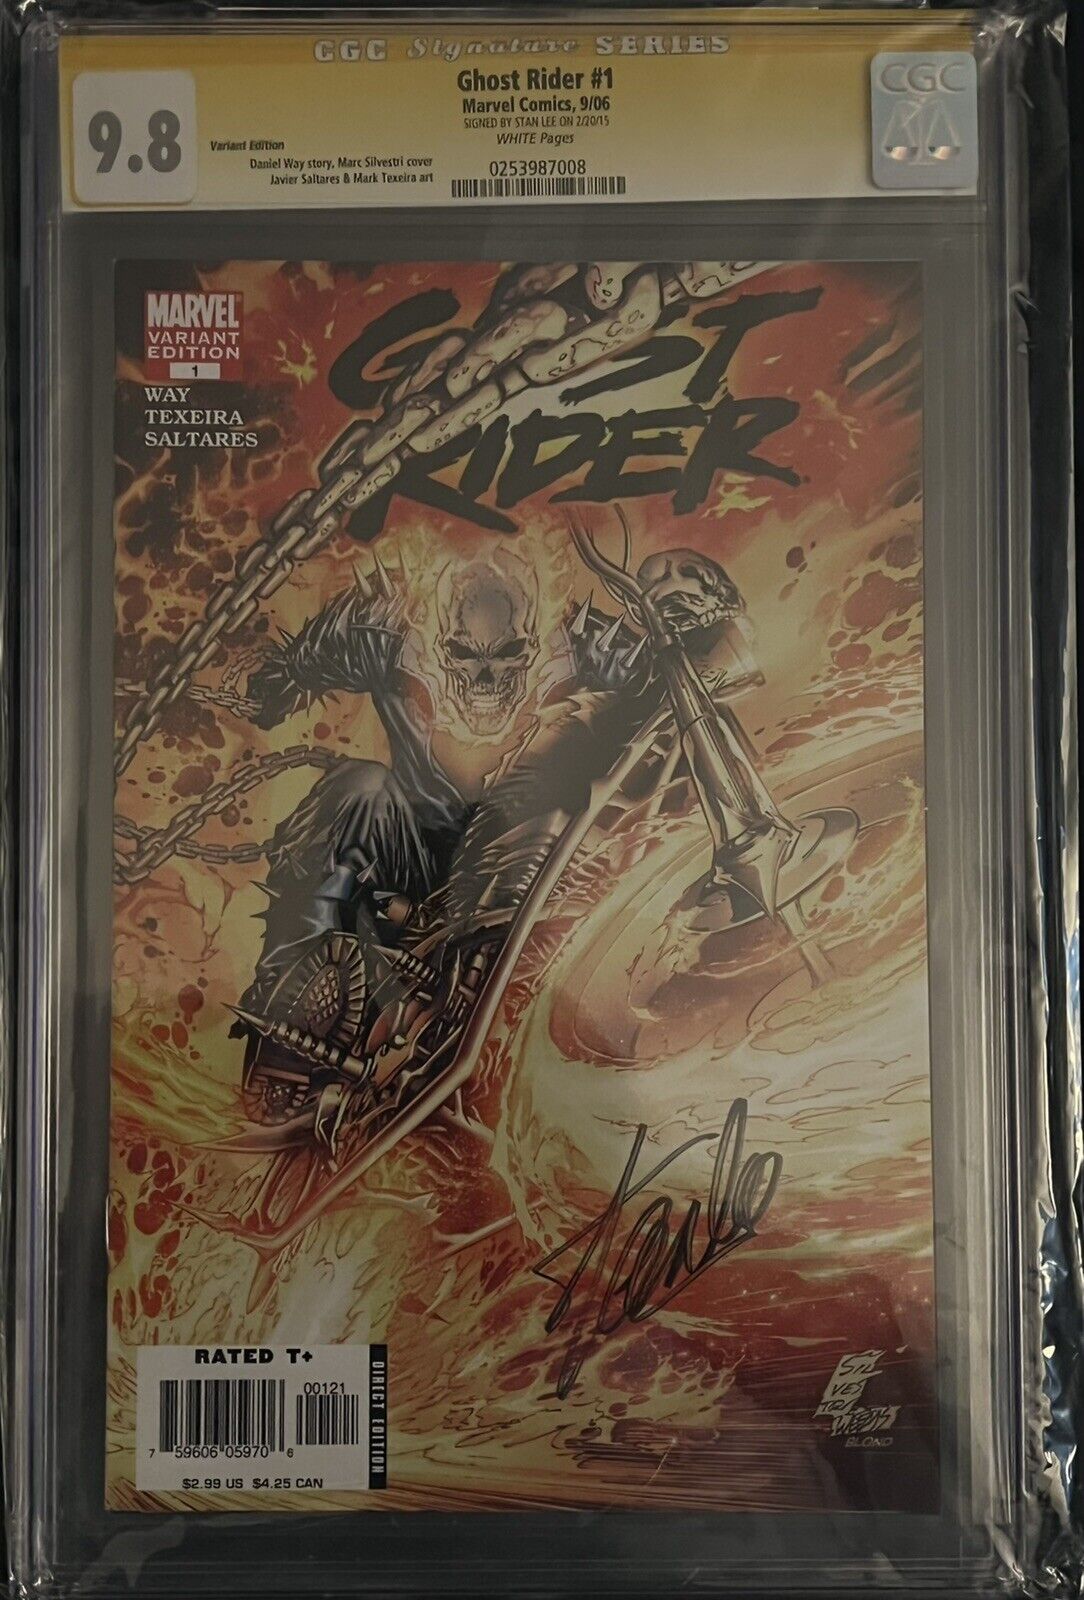 GHOST RIDER 1 - CGC Signed By Stan Lee RARE CGC SS 9.8 🔥🔥🔥